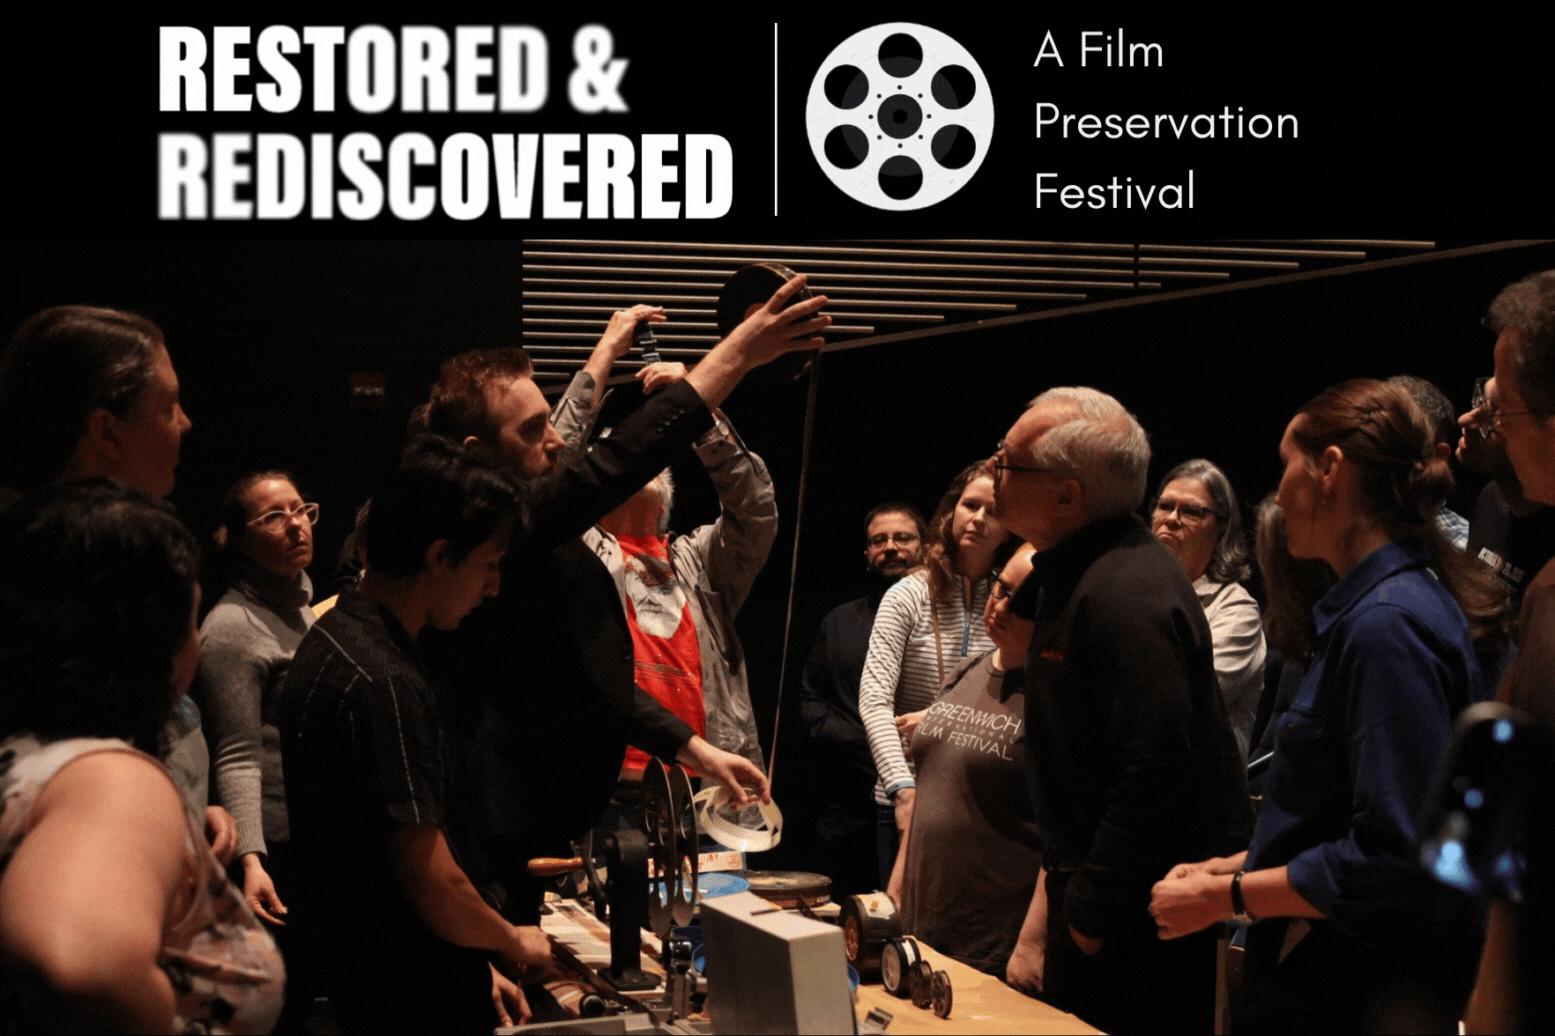 A Recap of our Inaugural Film Preservation Festival